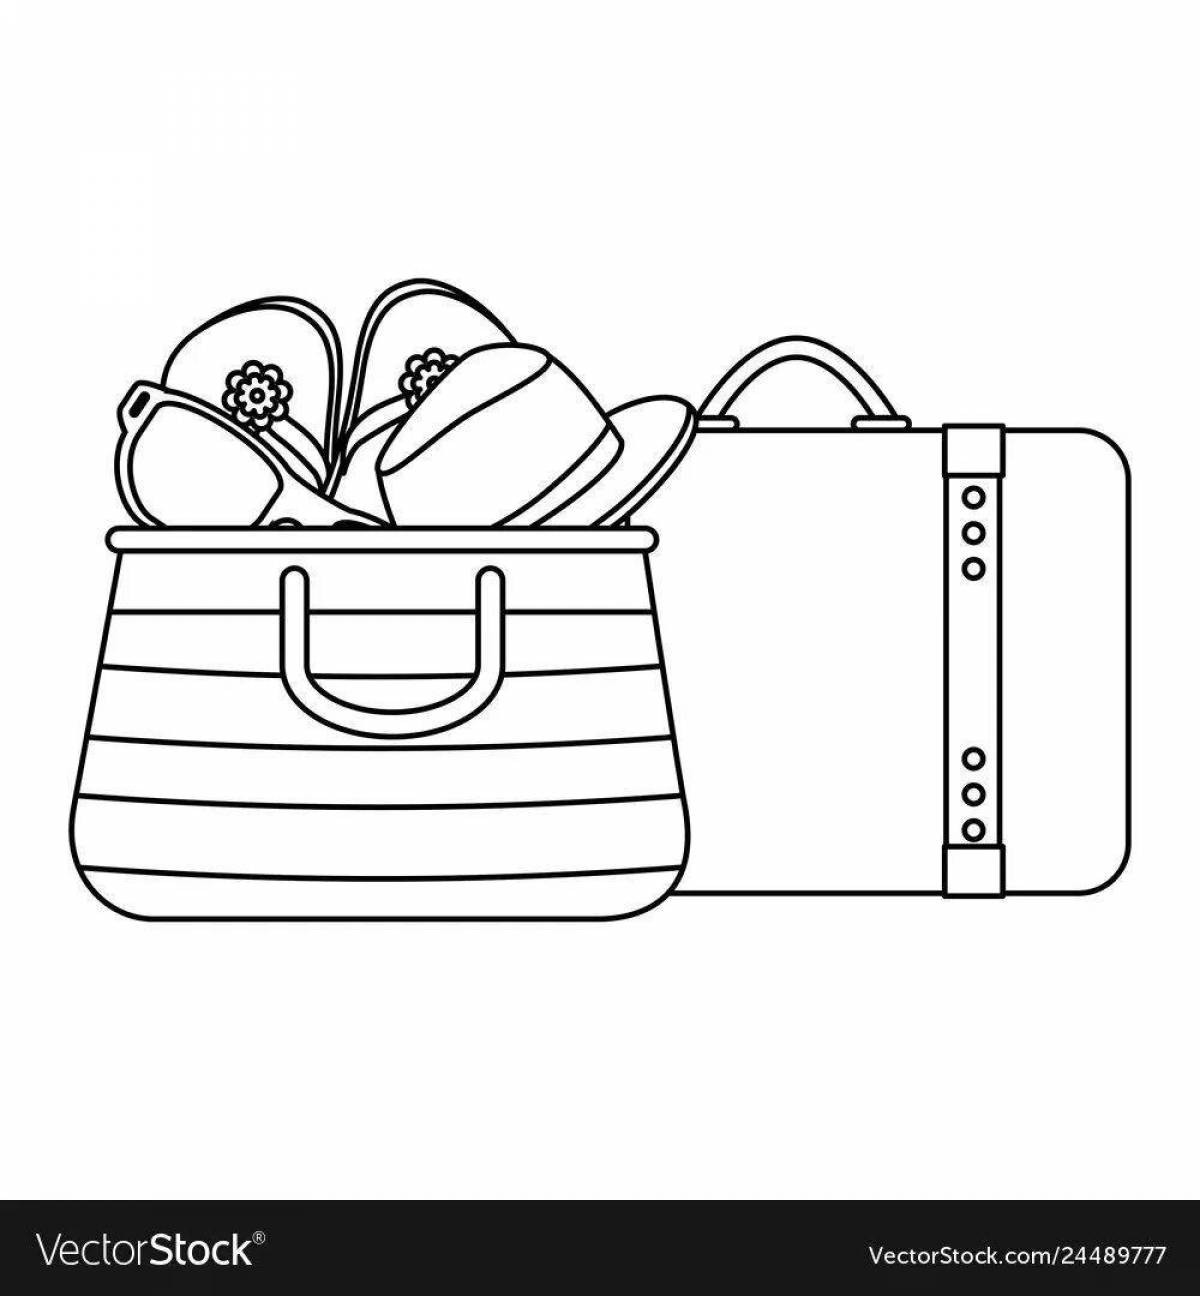 Coloring page beach bag with colorful dots